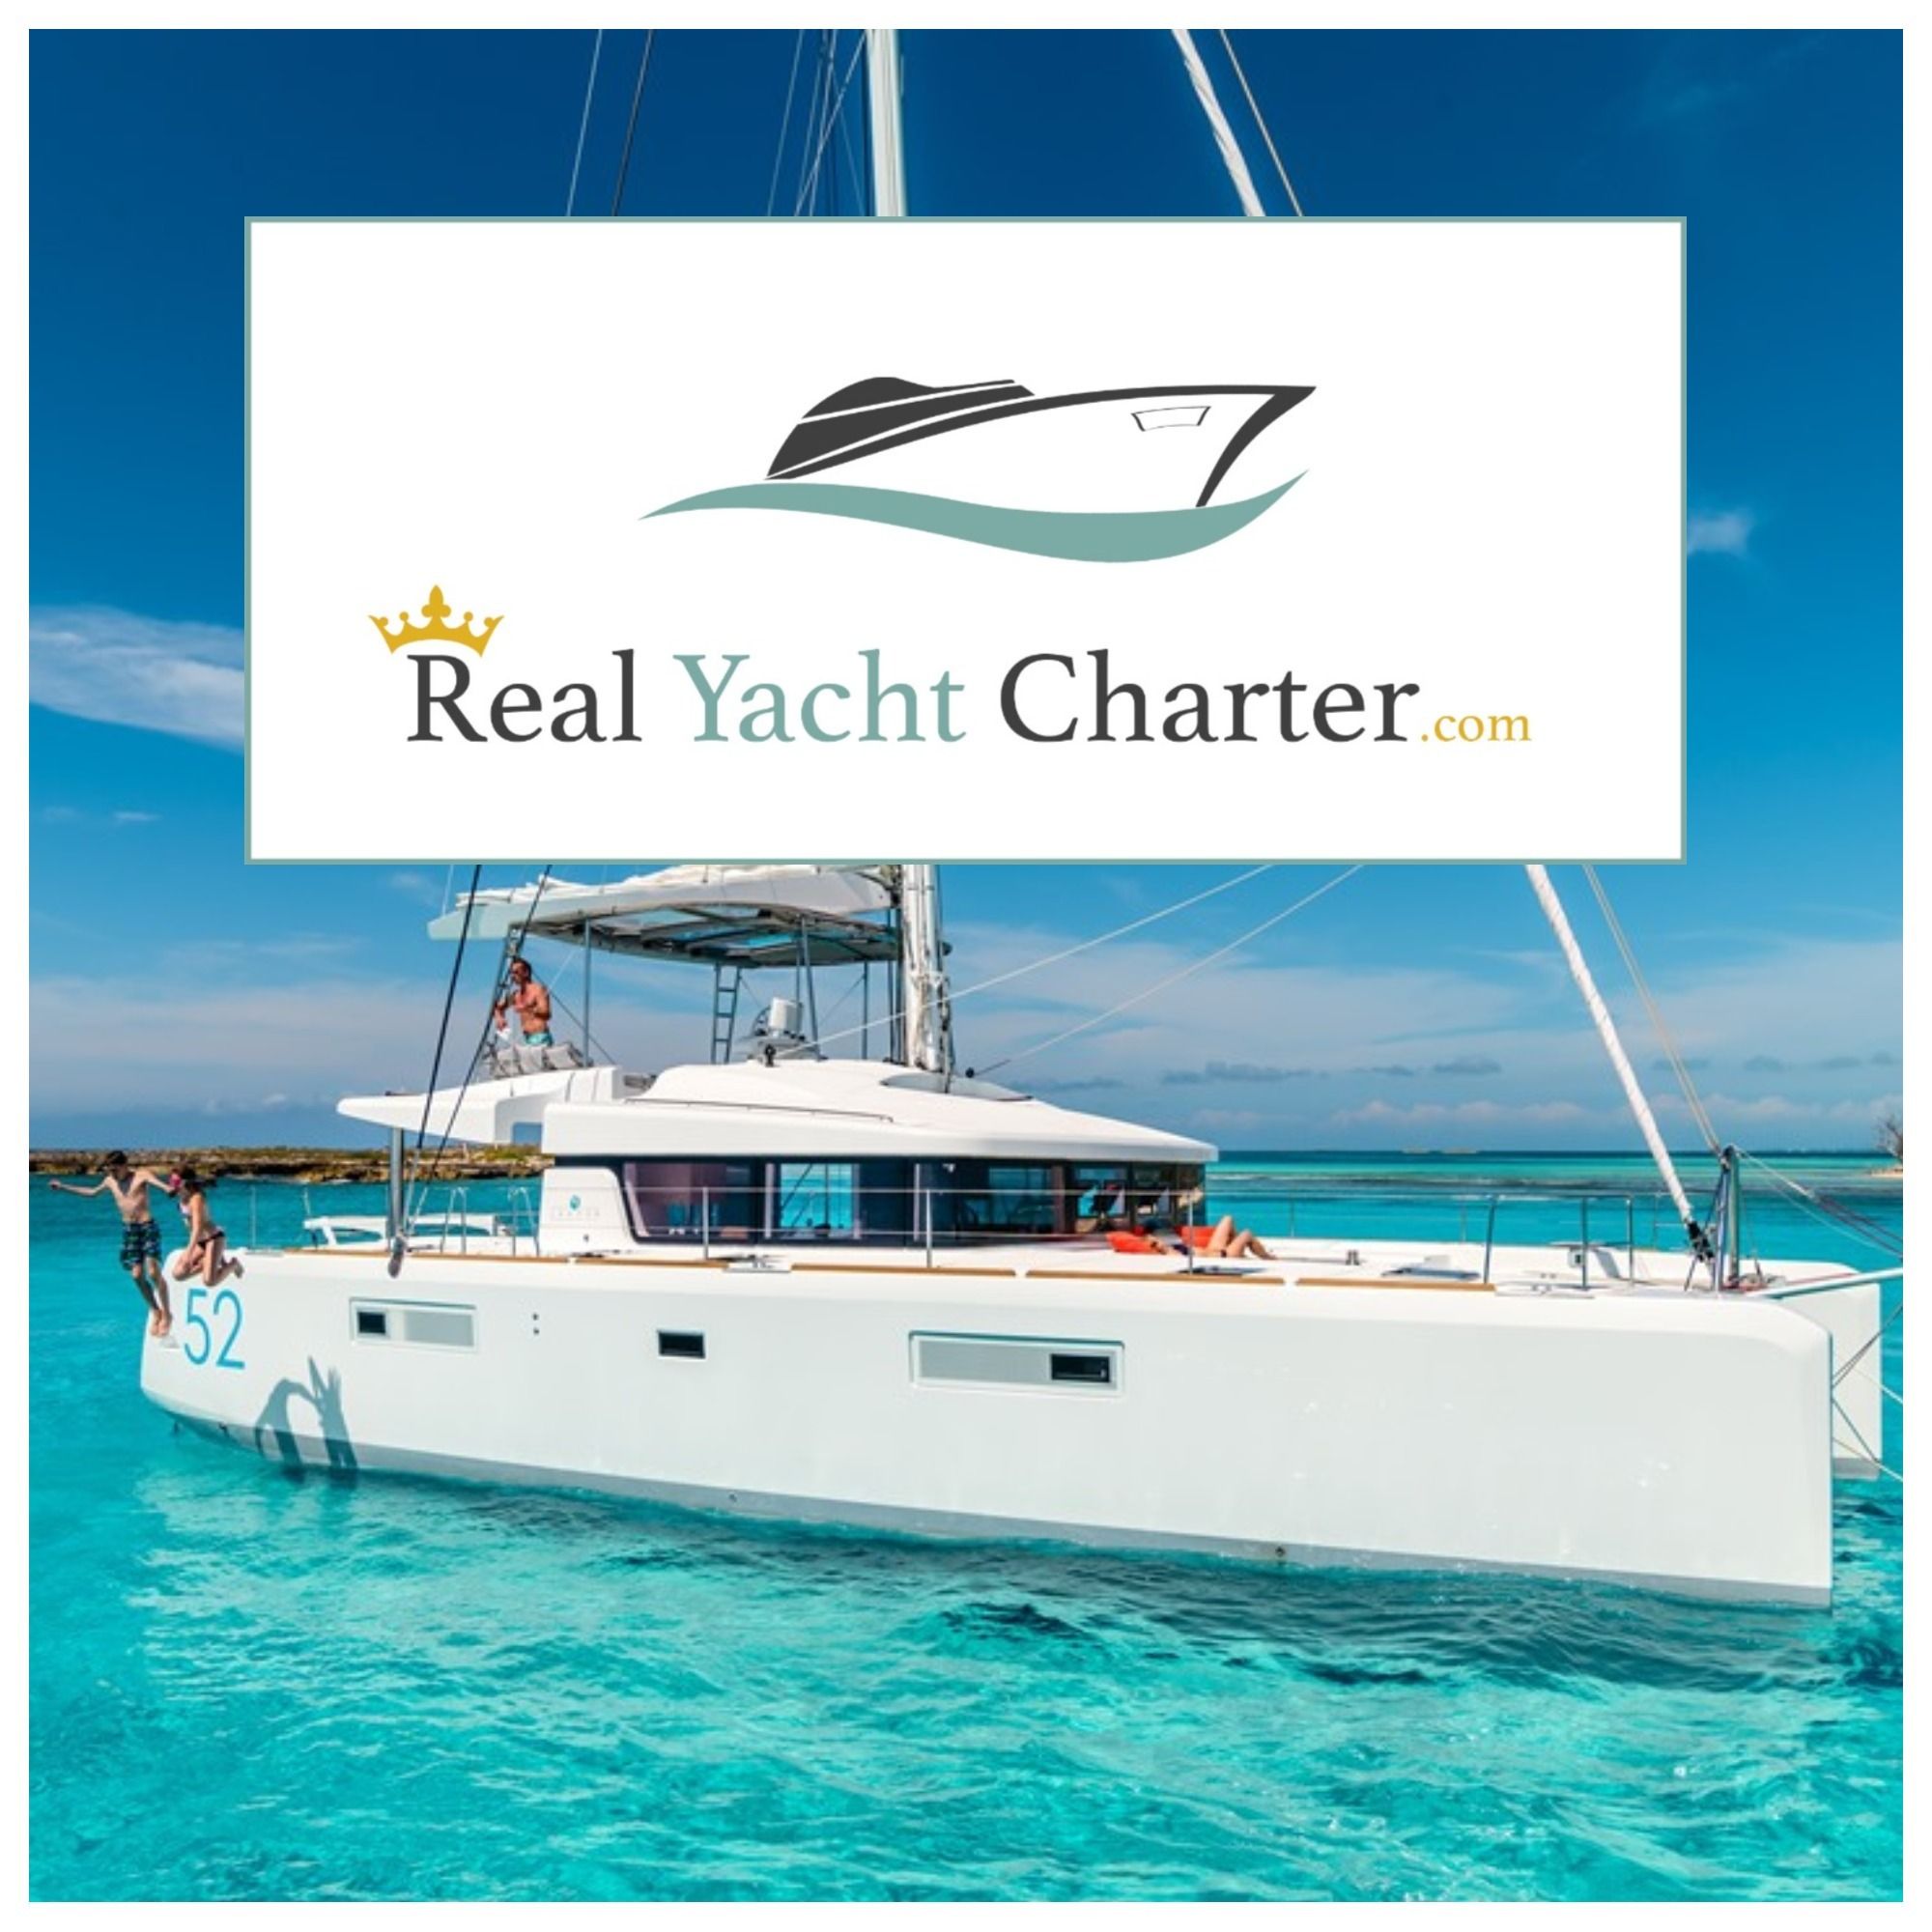 real yacht services gmbh